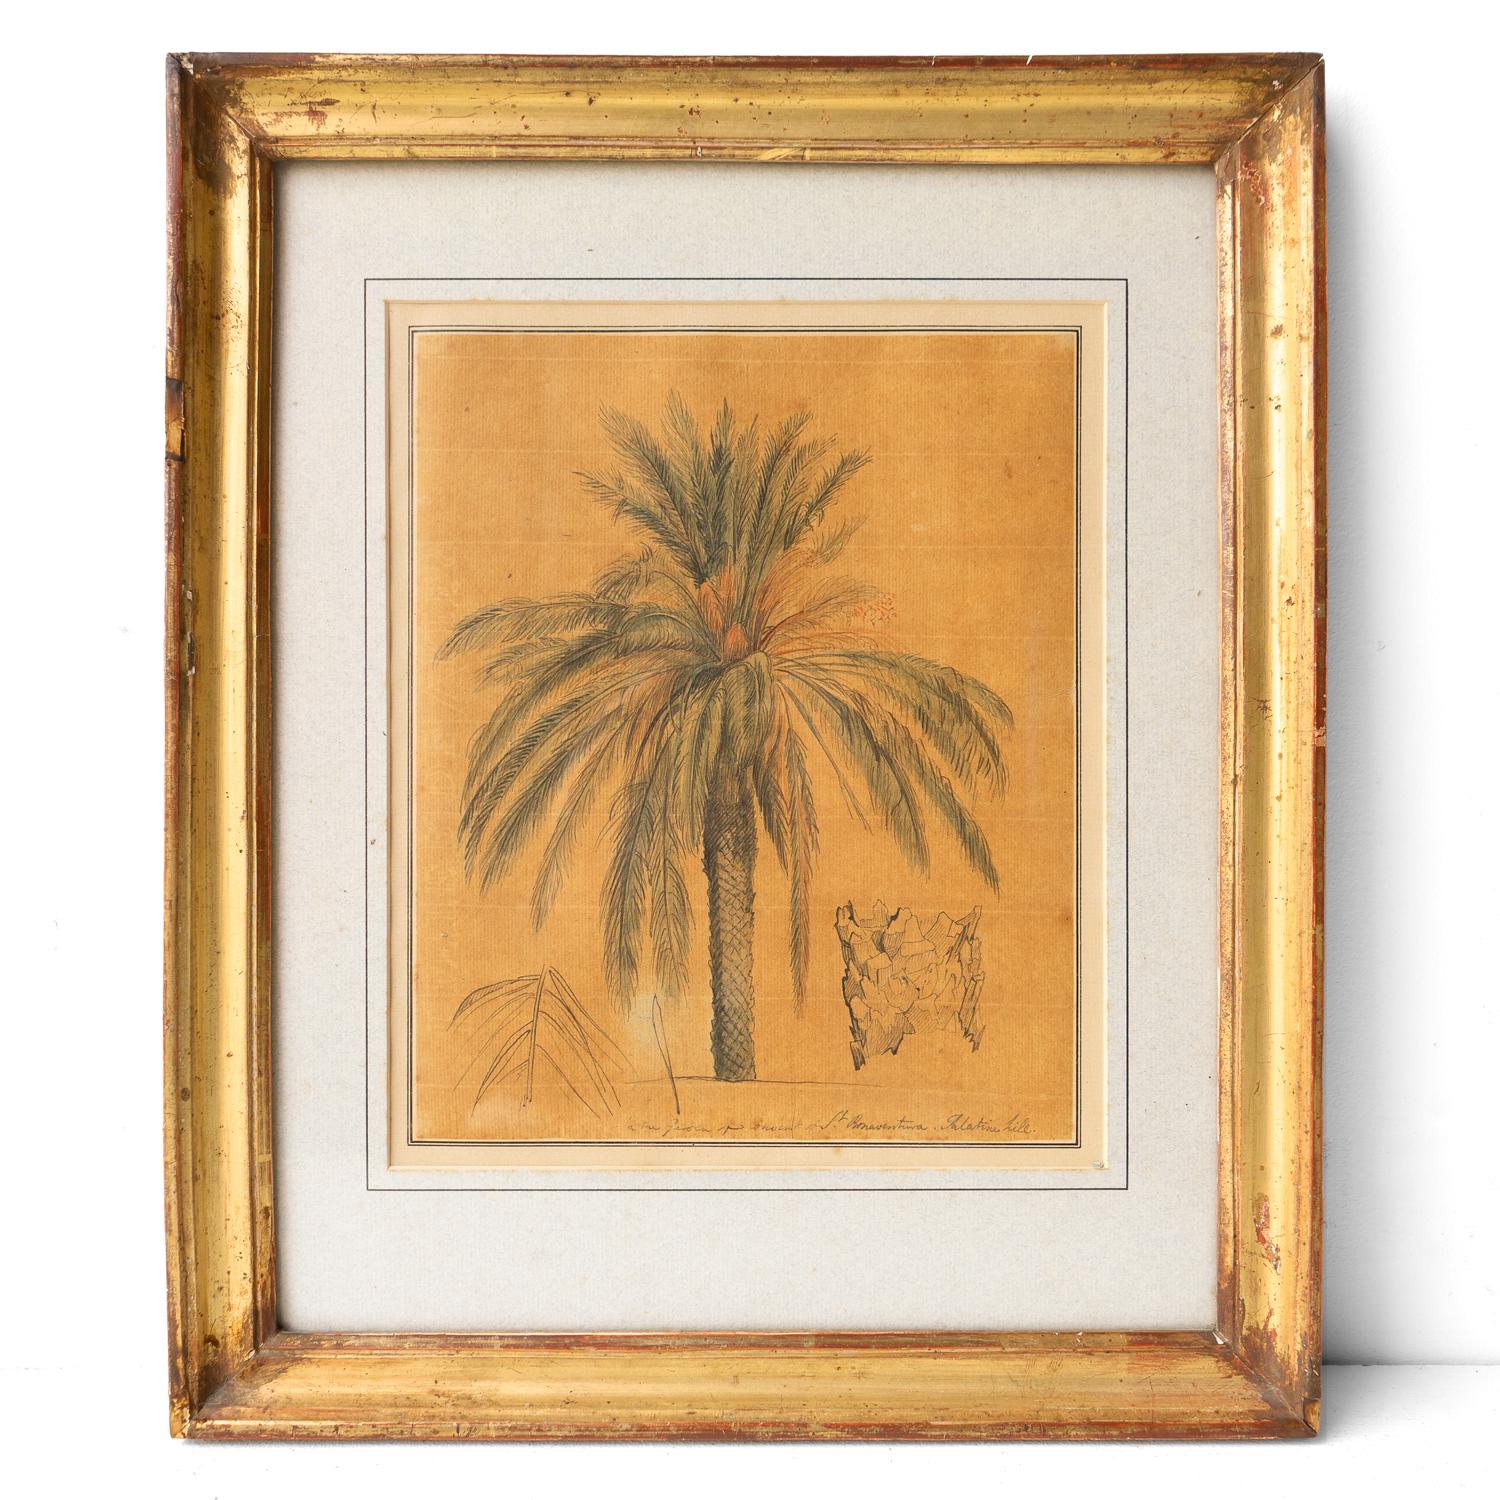 Antique Original Drawing

A very well-executed and attractive study of a palm tree in ink and wash on watermarked brown paper.

Inscribed by Flaxman’s hand ‘In the Garden of Convent of St. Bonaventura. Palatine Hill.’

John Flaxman RA (1755-1826),